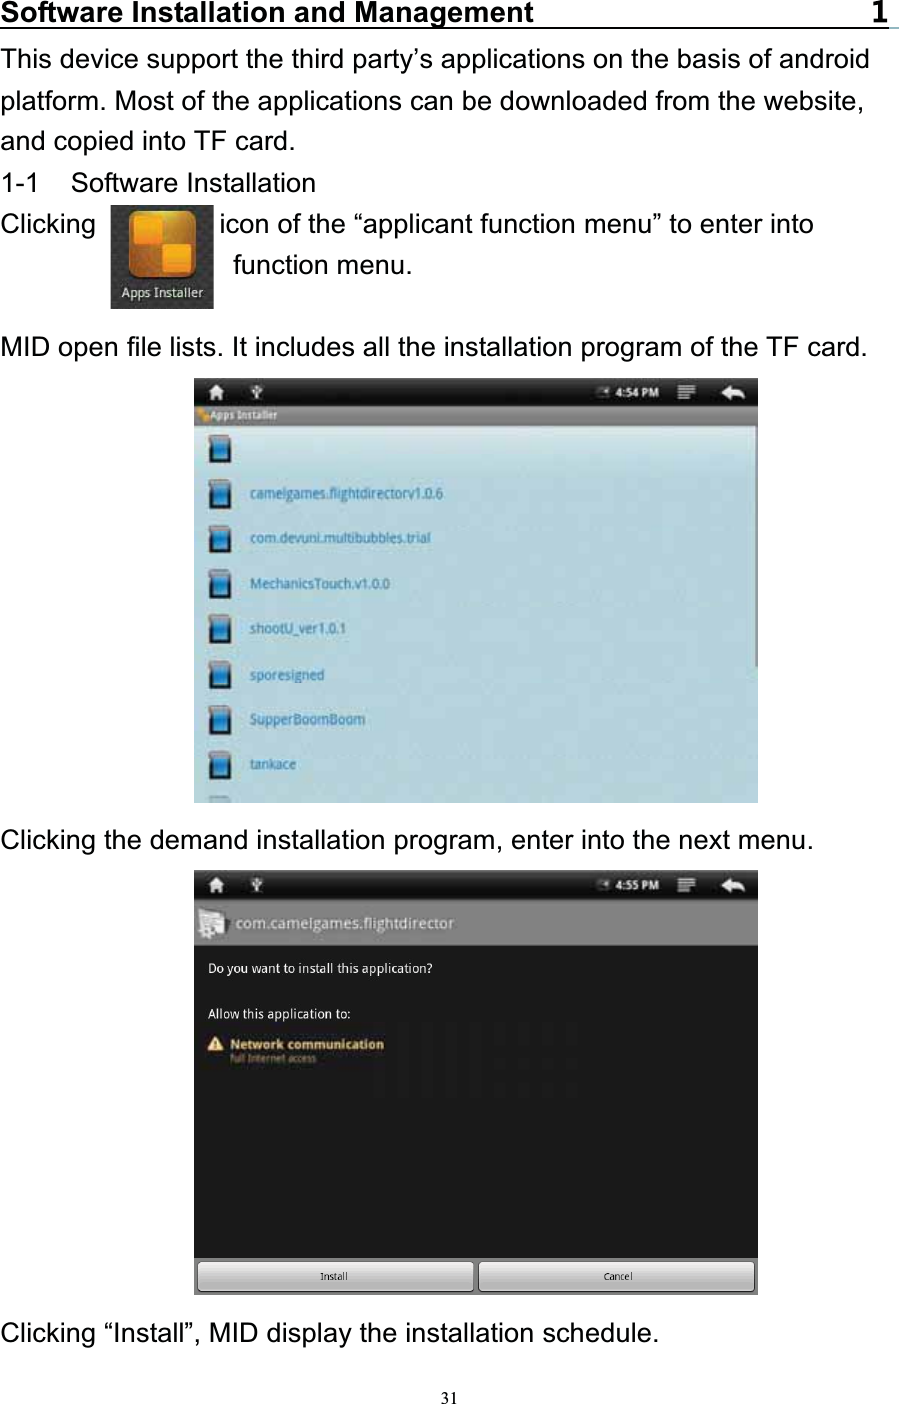   31Software Installation and ManagementThis device support the third party’s applications on the basis of android platform. Most of the applications can be downloaded from the website, and copied into TF card. 1-1 Software Installation Clicking         icon of the “applicant function menu” to enter into function menu. MID open file lists. It includes all the installation program of the TF card. Clicking the demand installation program, enter into the next menu.  Clicking “Install”, MID display the installation schedule. 